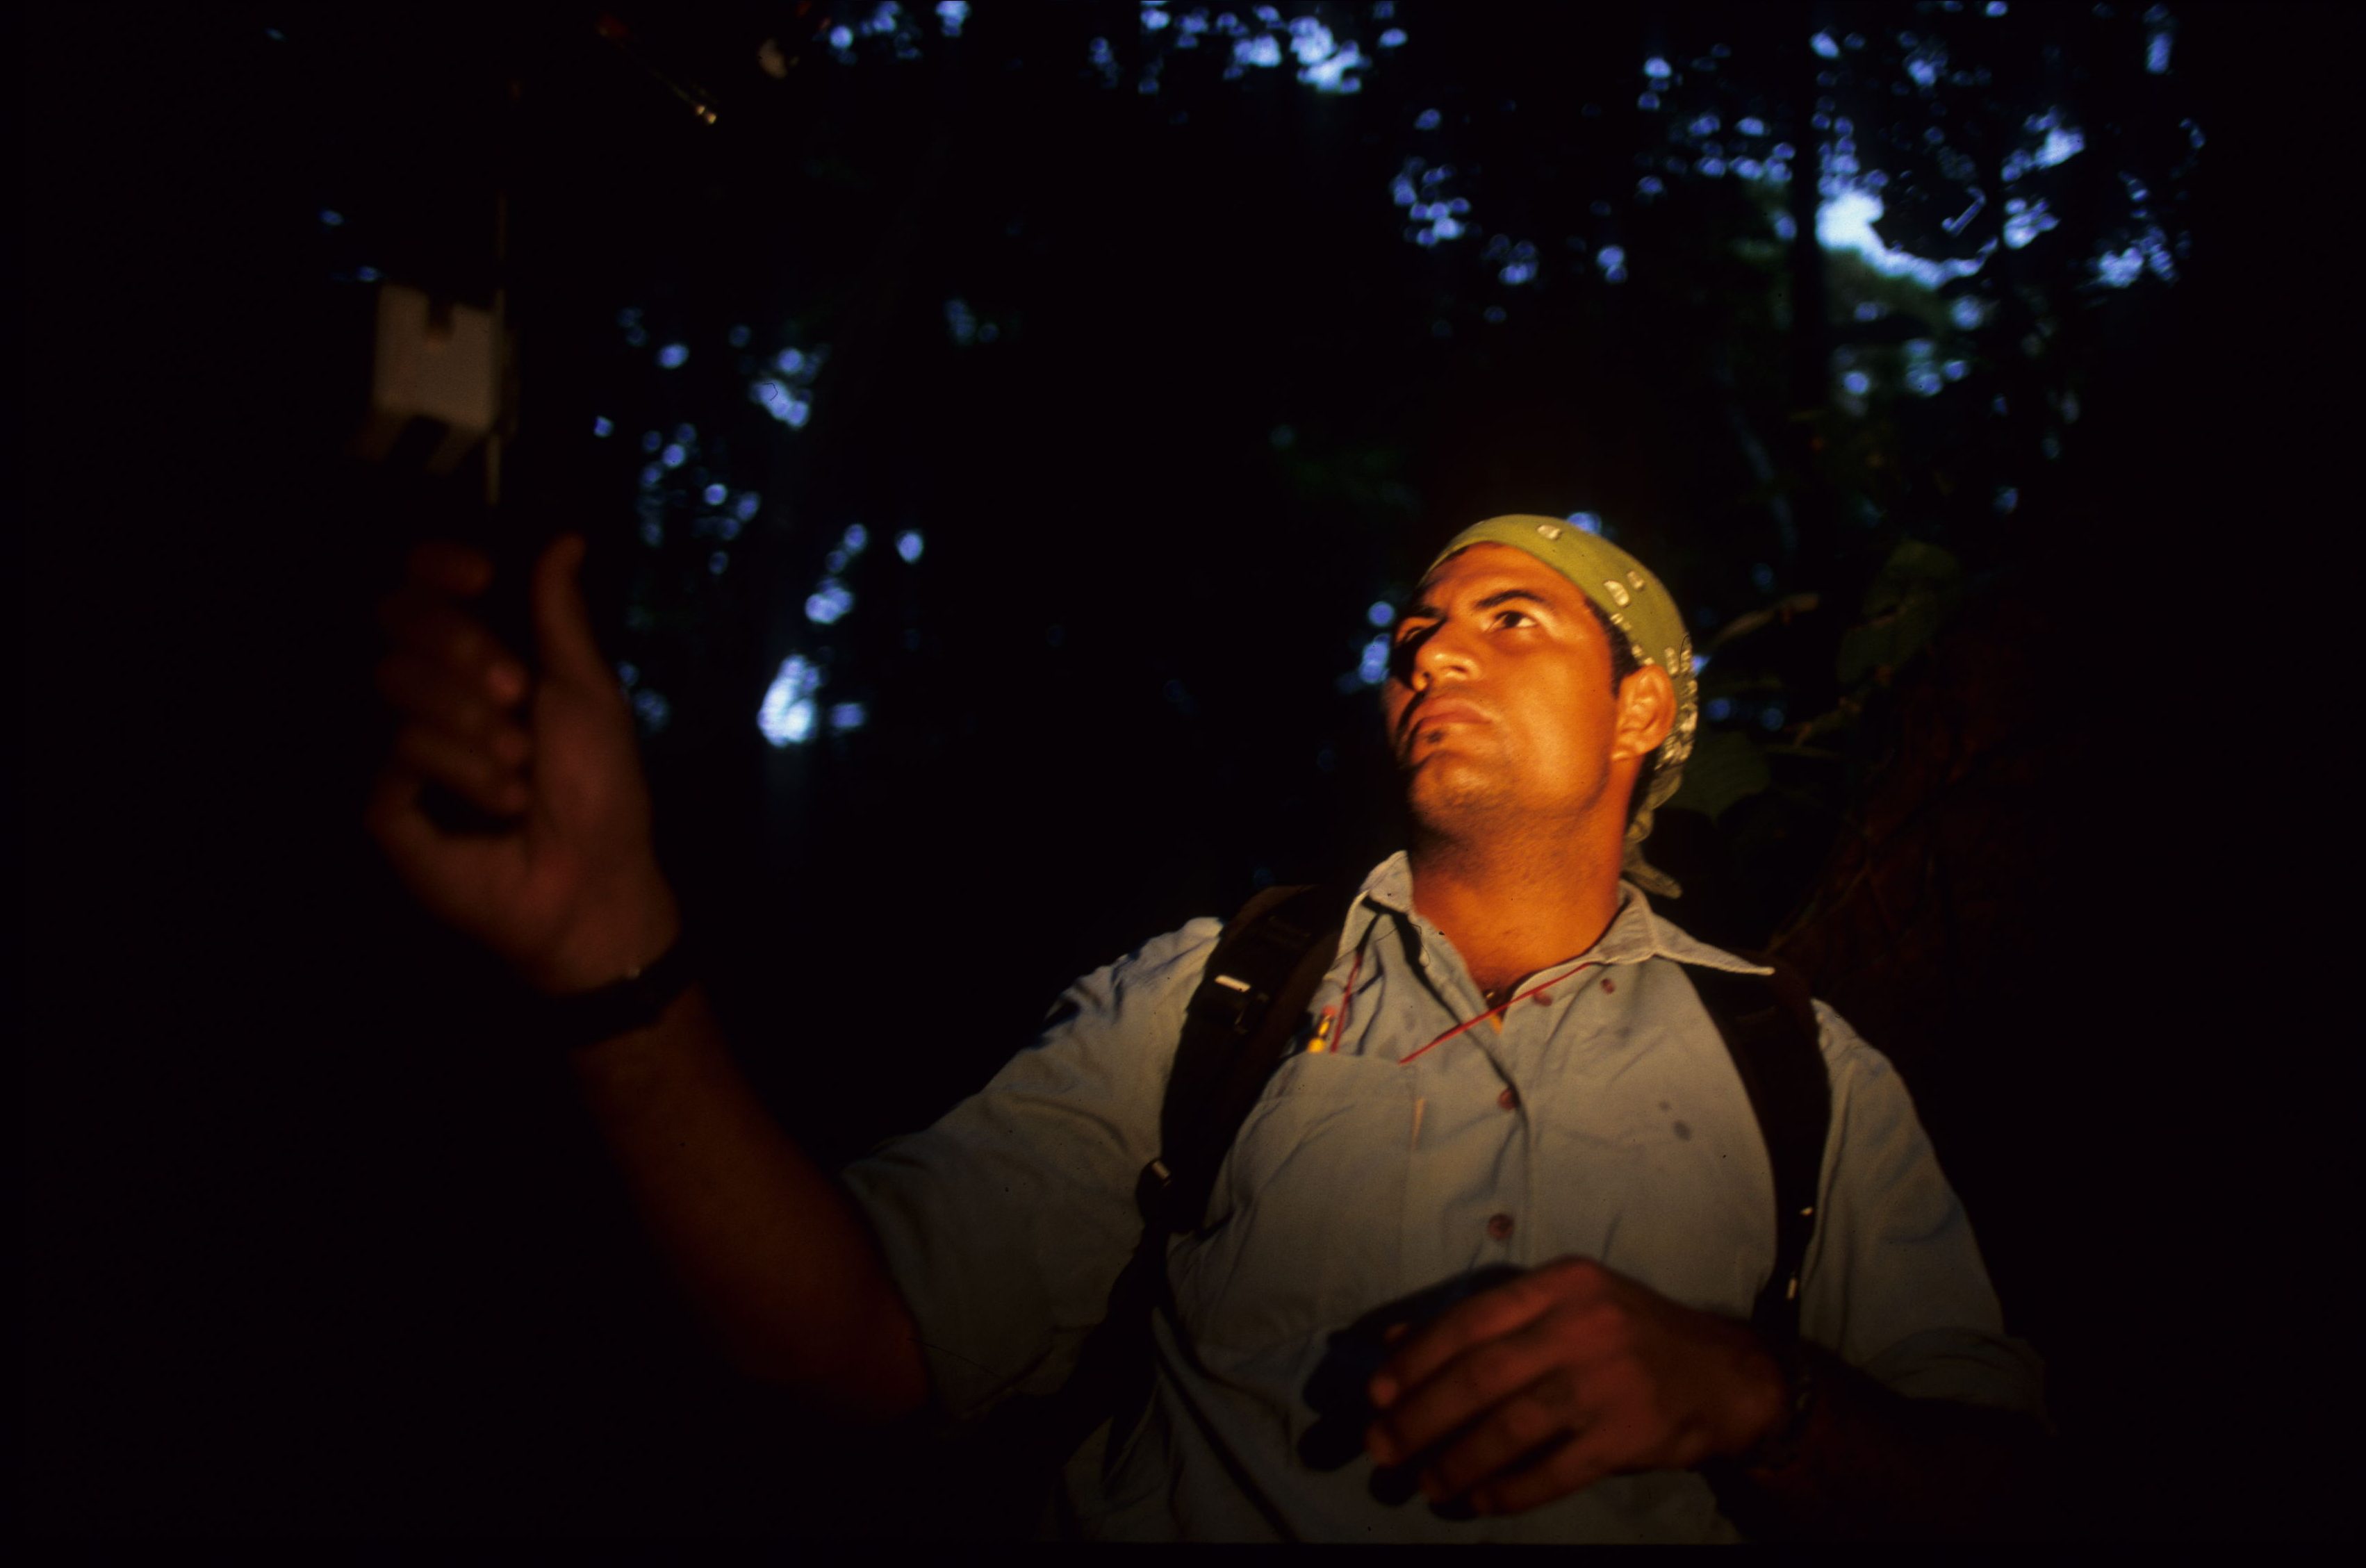 Ricardo tracked Bobby using VHF collars, requiring hours of walking through the forests of Barro Colorado at night  (Photo: Chrisitian Ziegler)